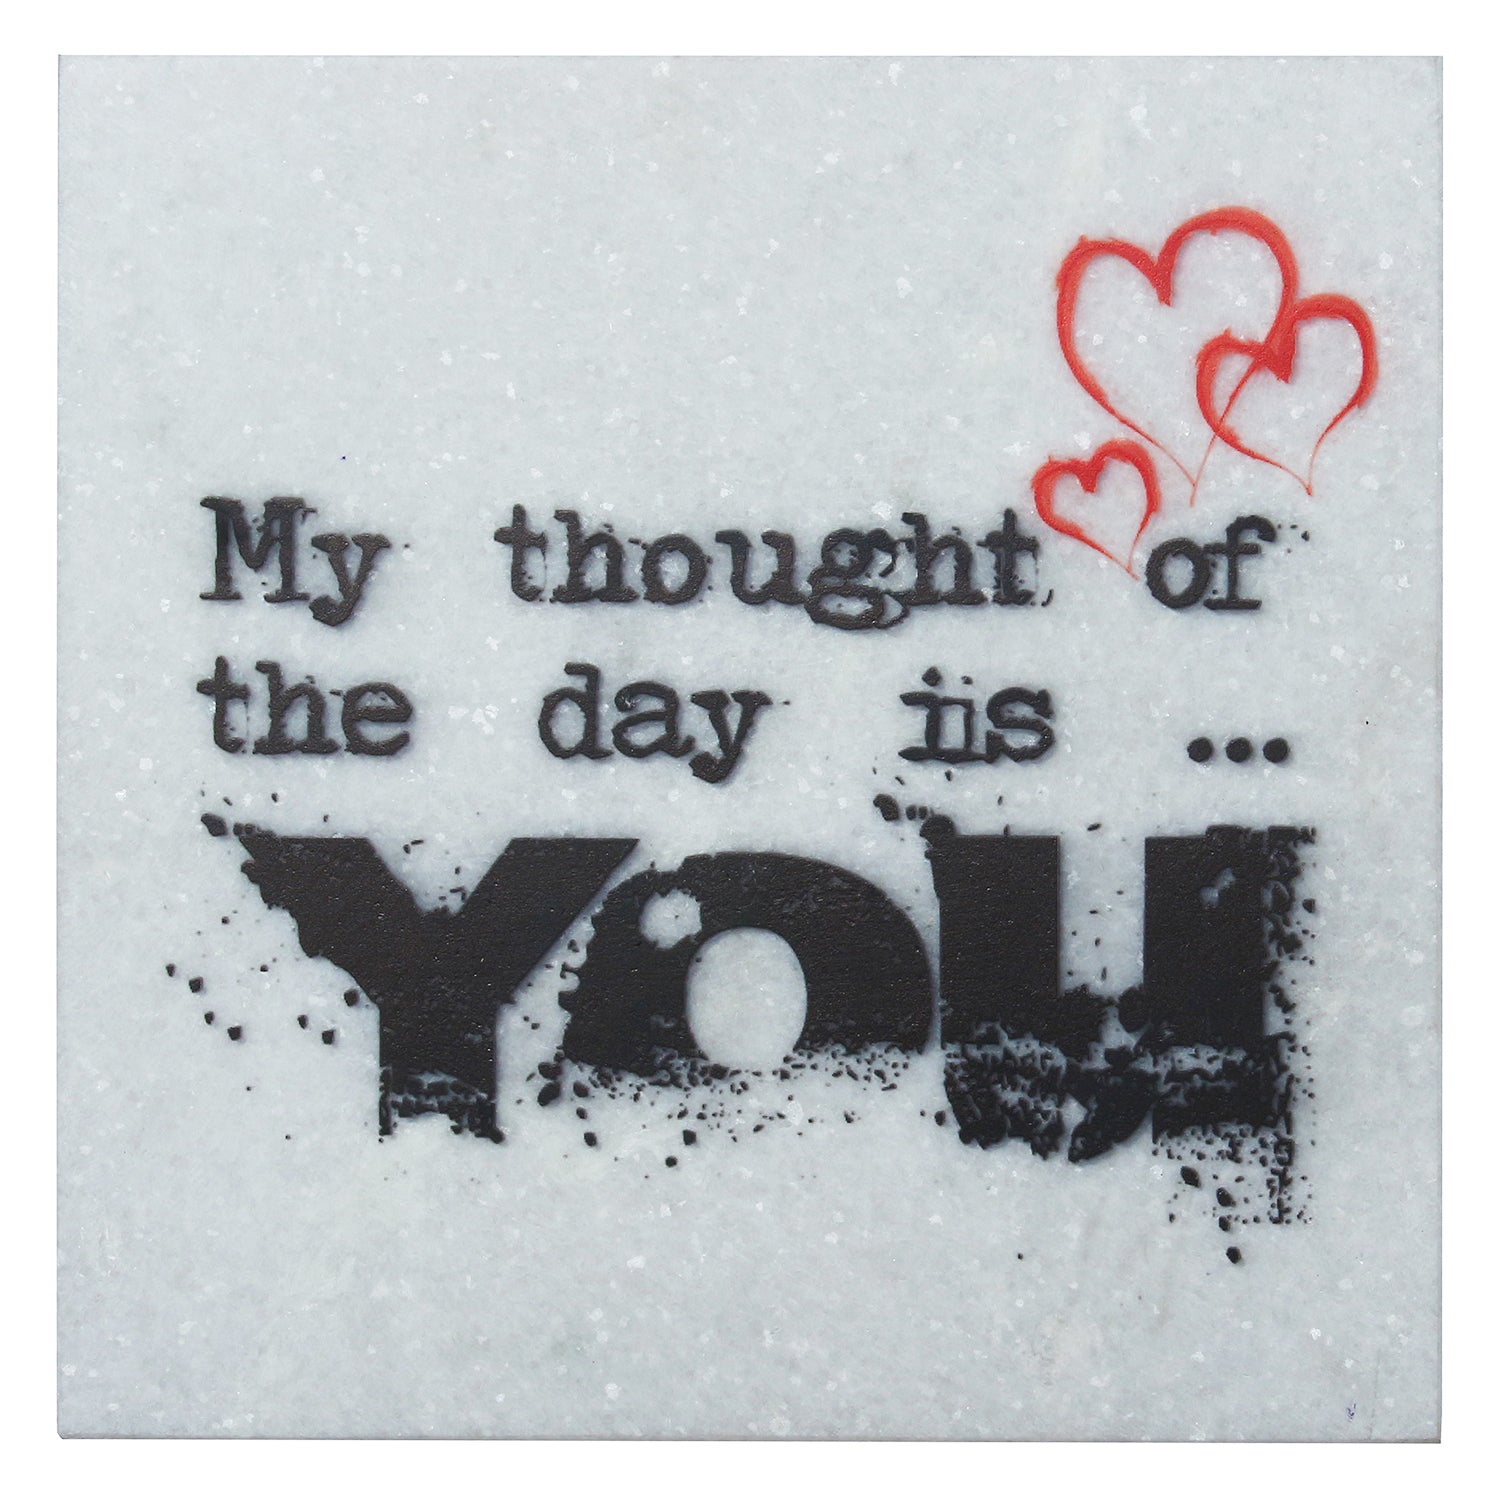 "My thought of the day is YOU" Quotation Painting On Marble Square Tile 1